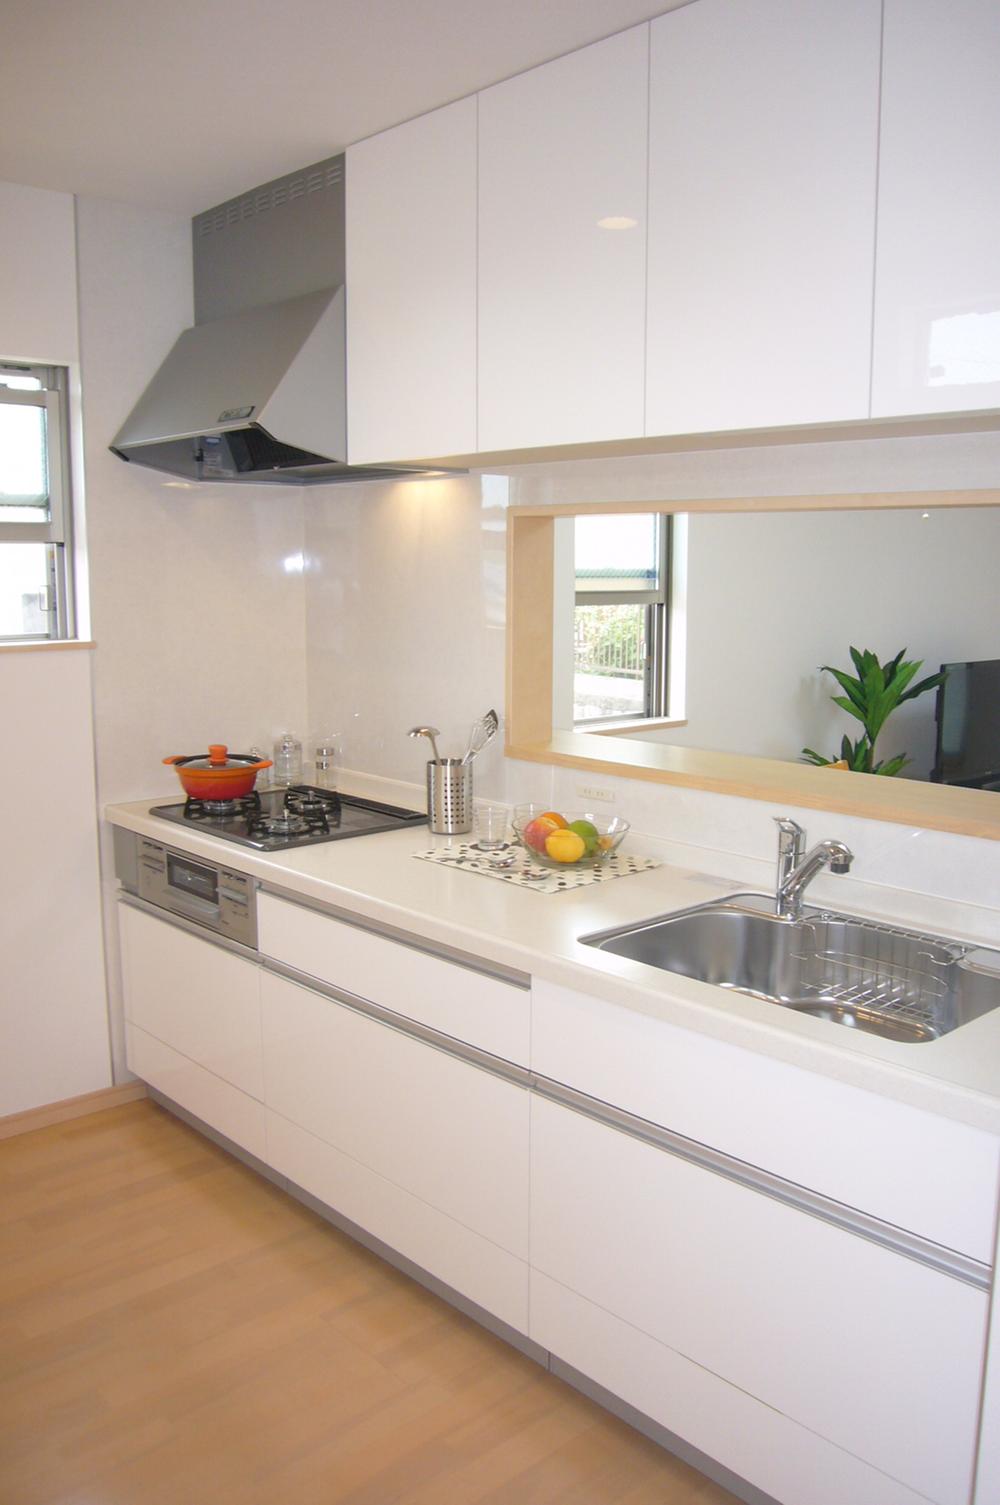 Same specifications photo (kitchen). TOWA STYLE S same specification kitchen